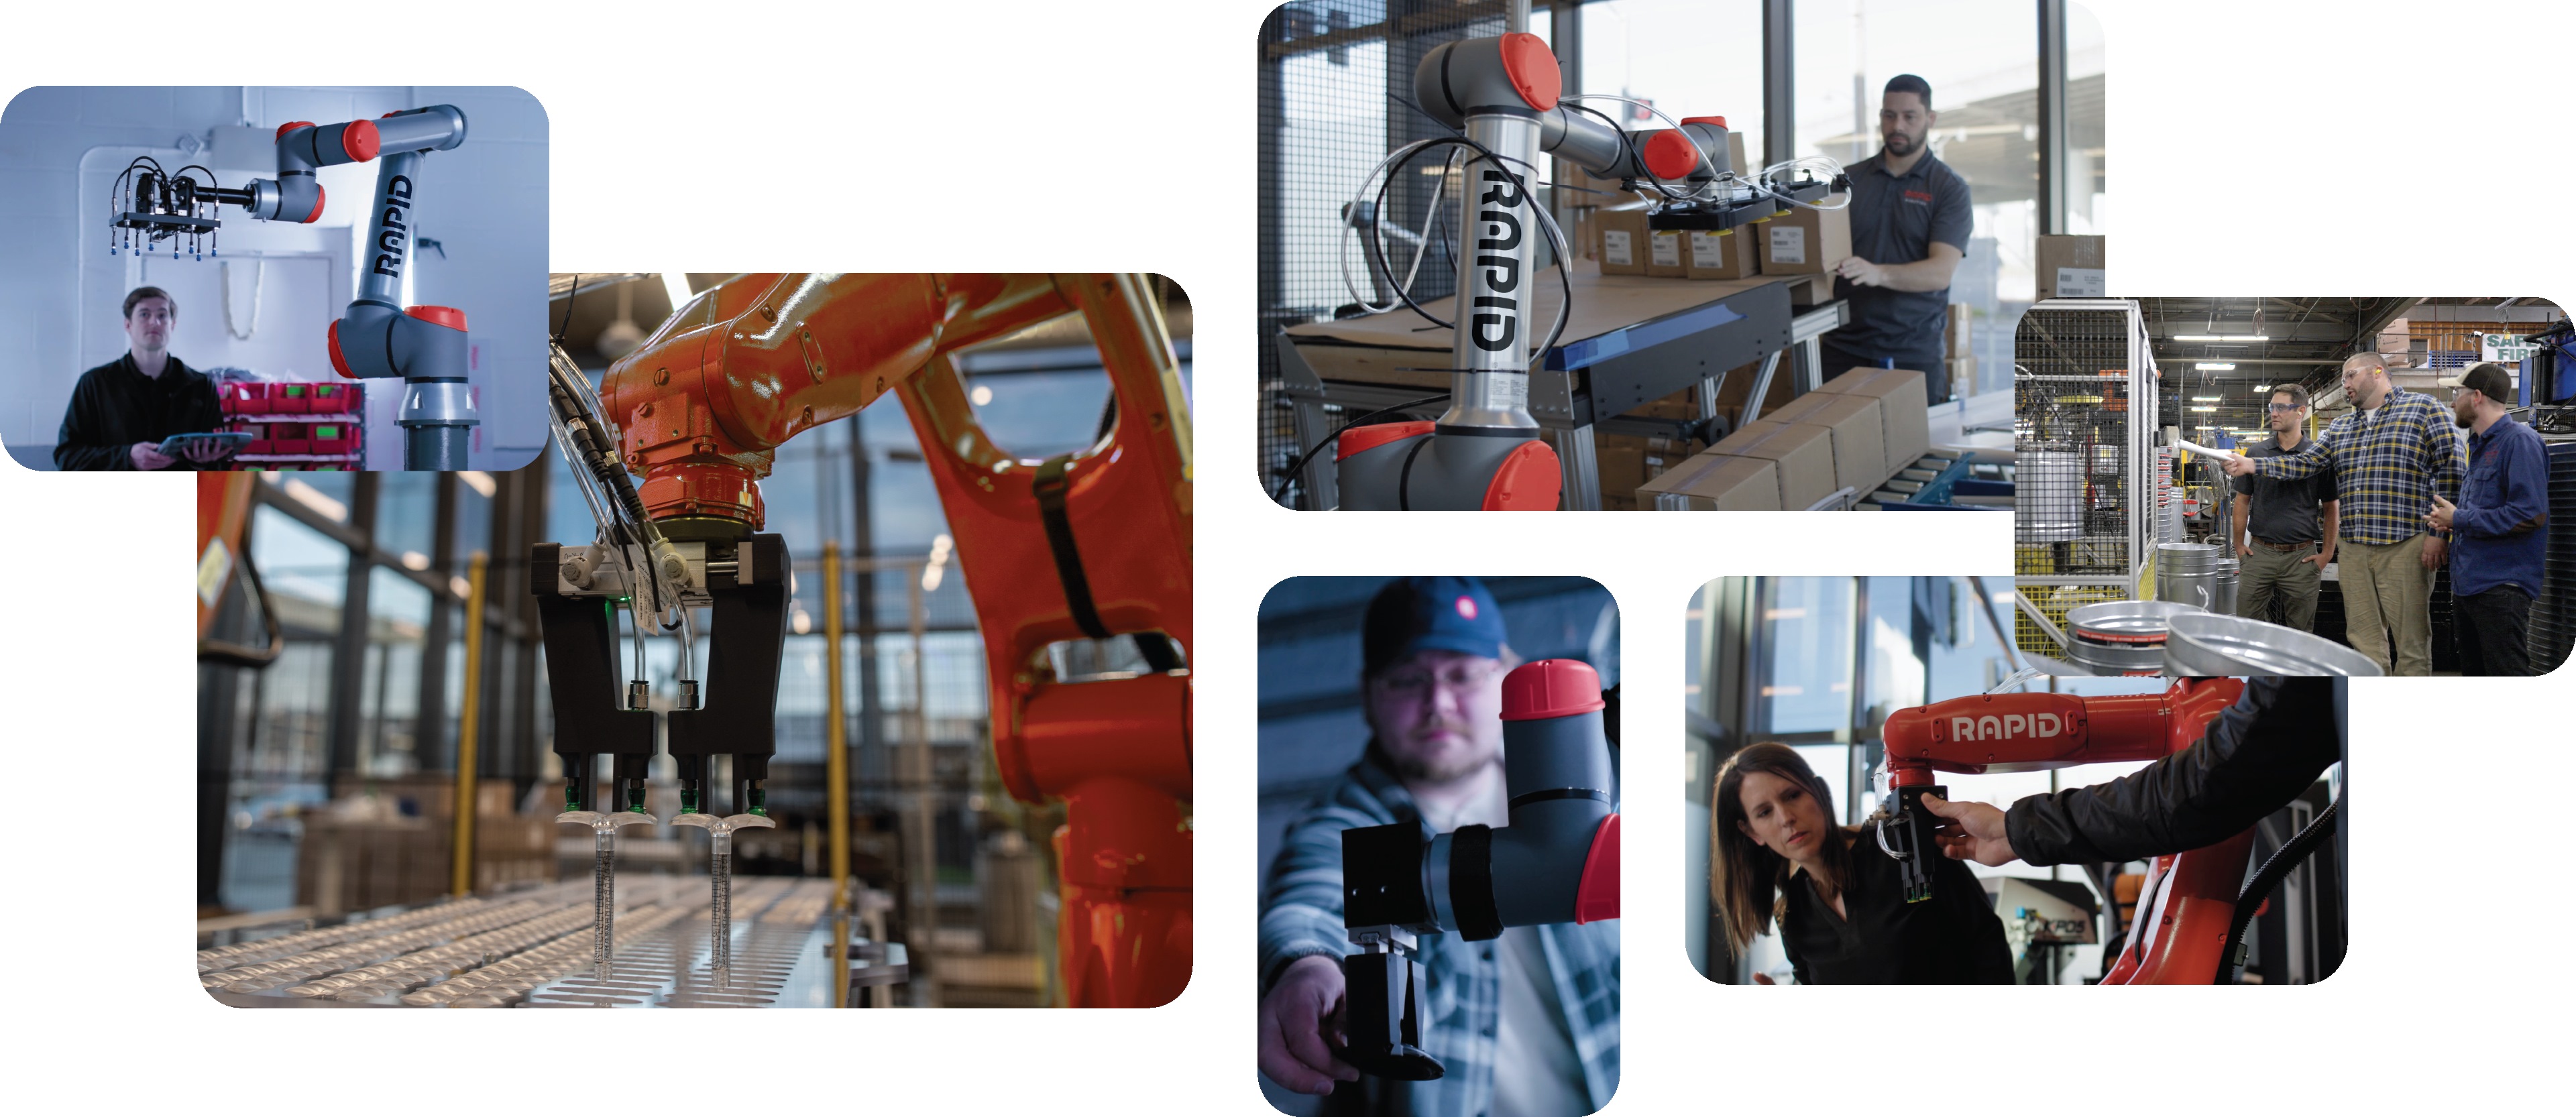 A collage of images showing robots and people working together.